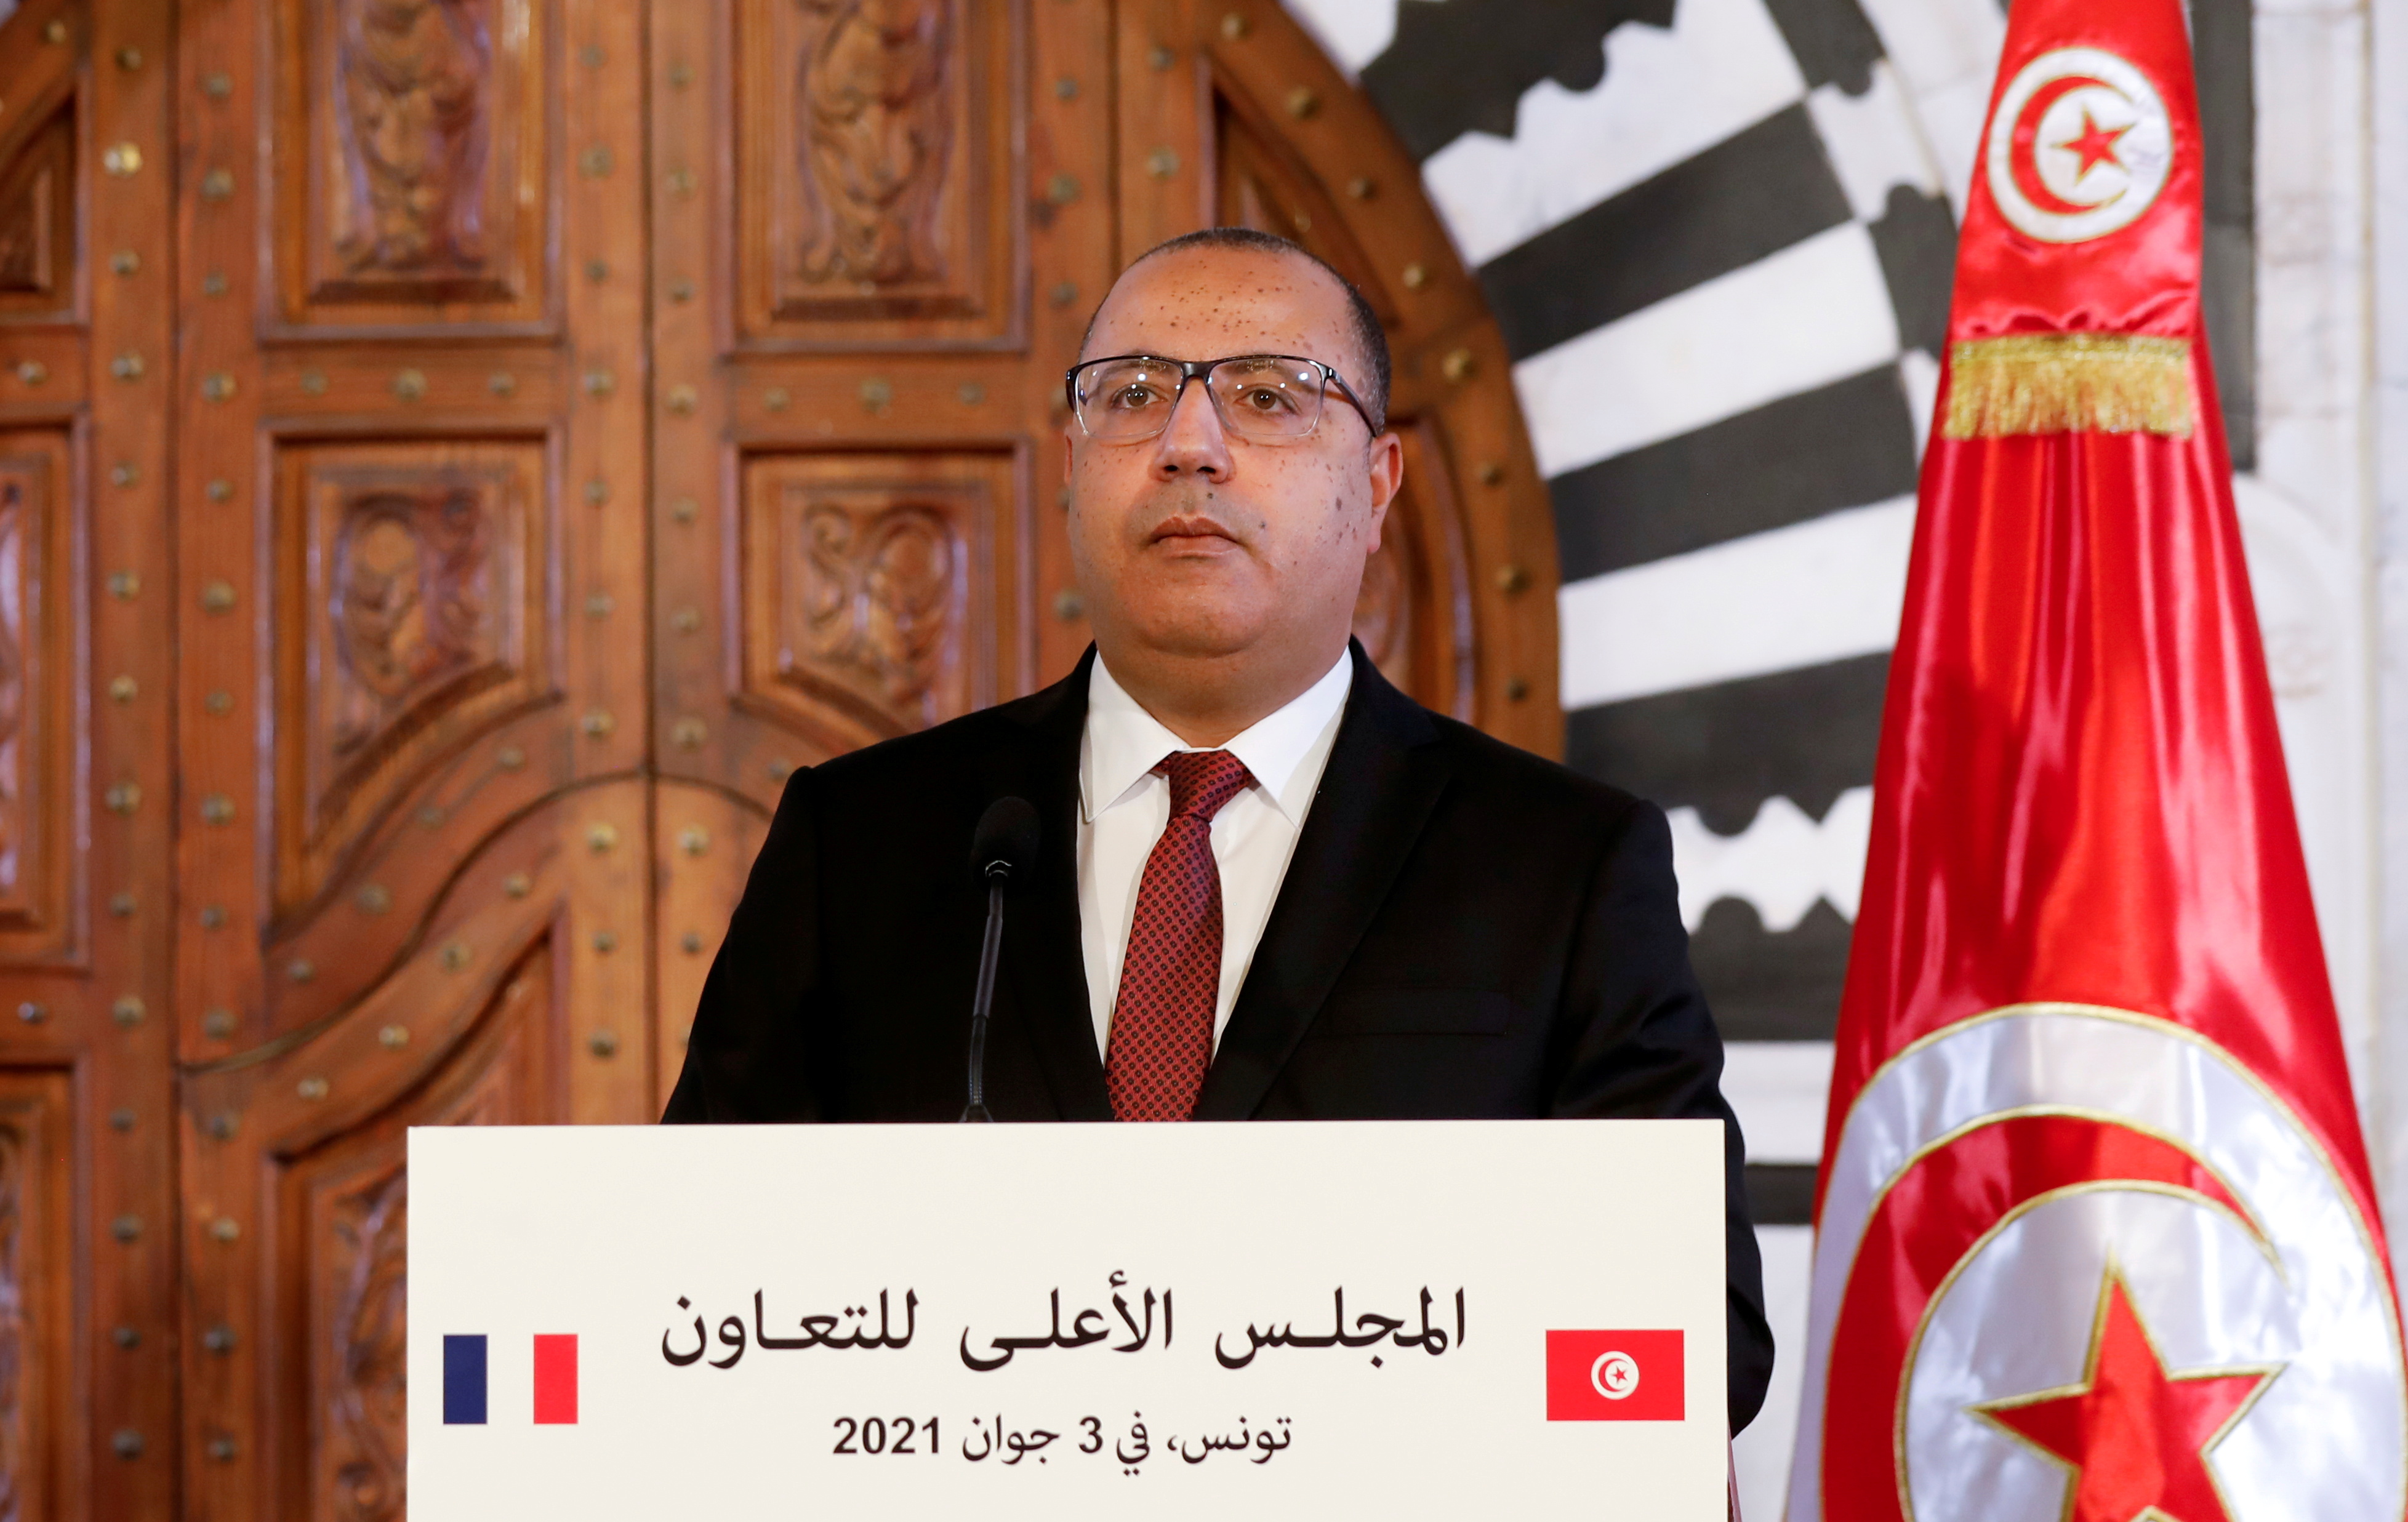 Tunisian prime minister appears in news conference